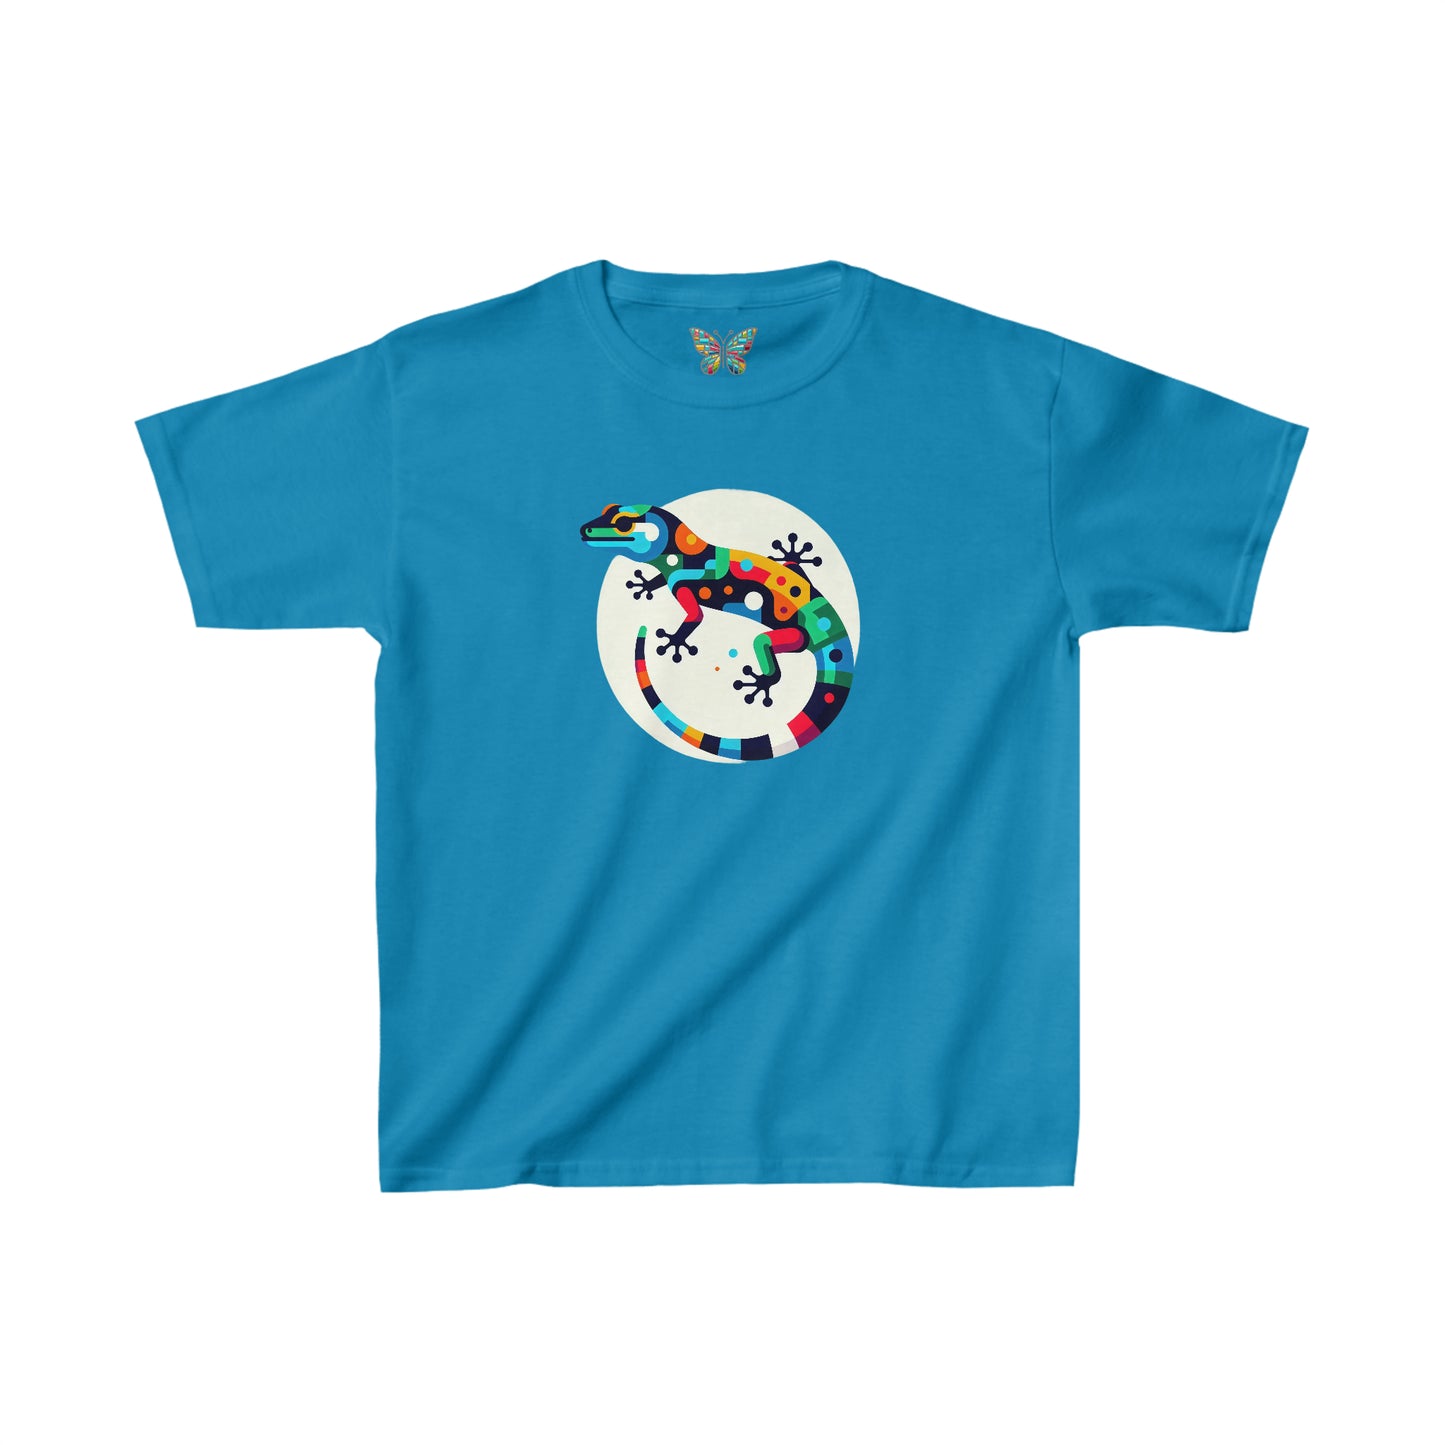 Leopard Gecko Blissundream - Youth - Snazzle Tee